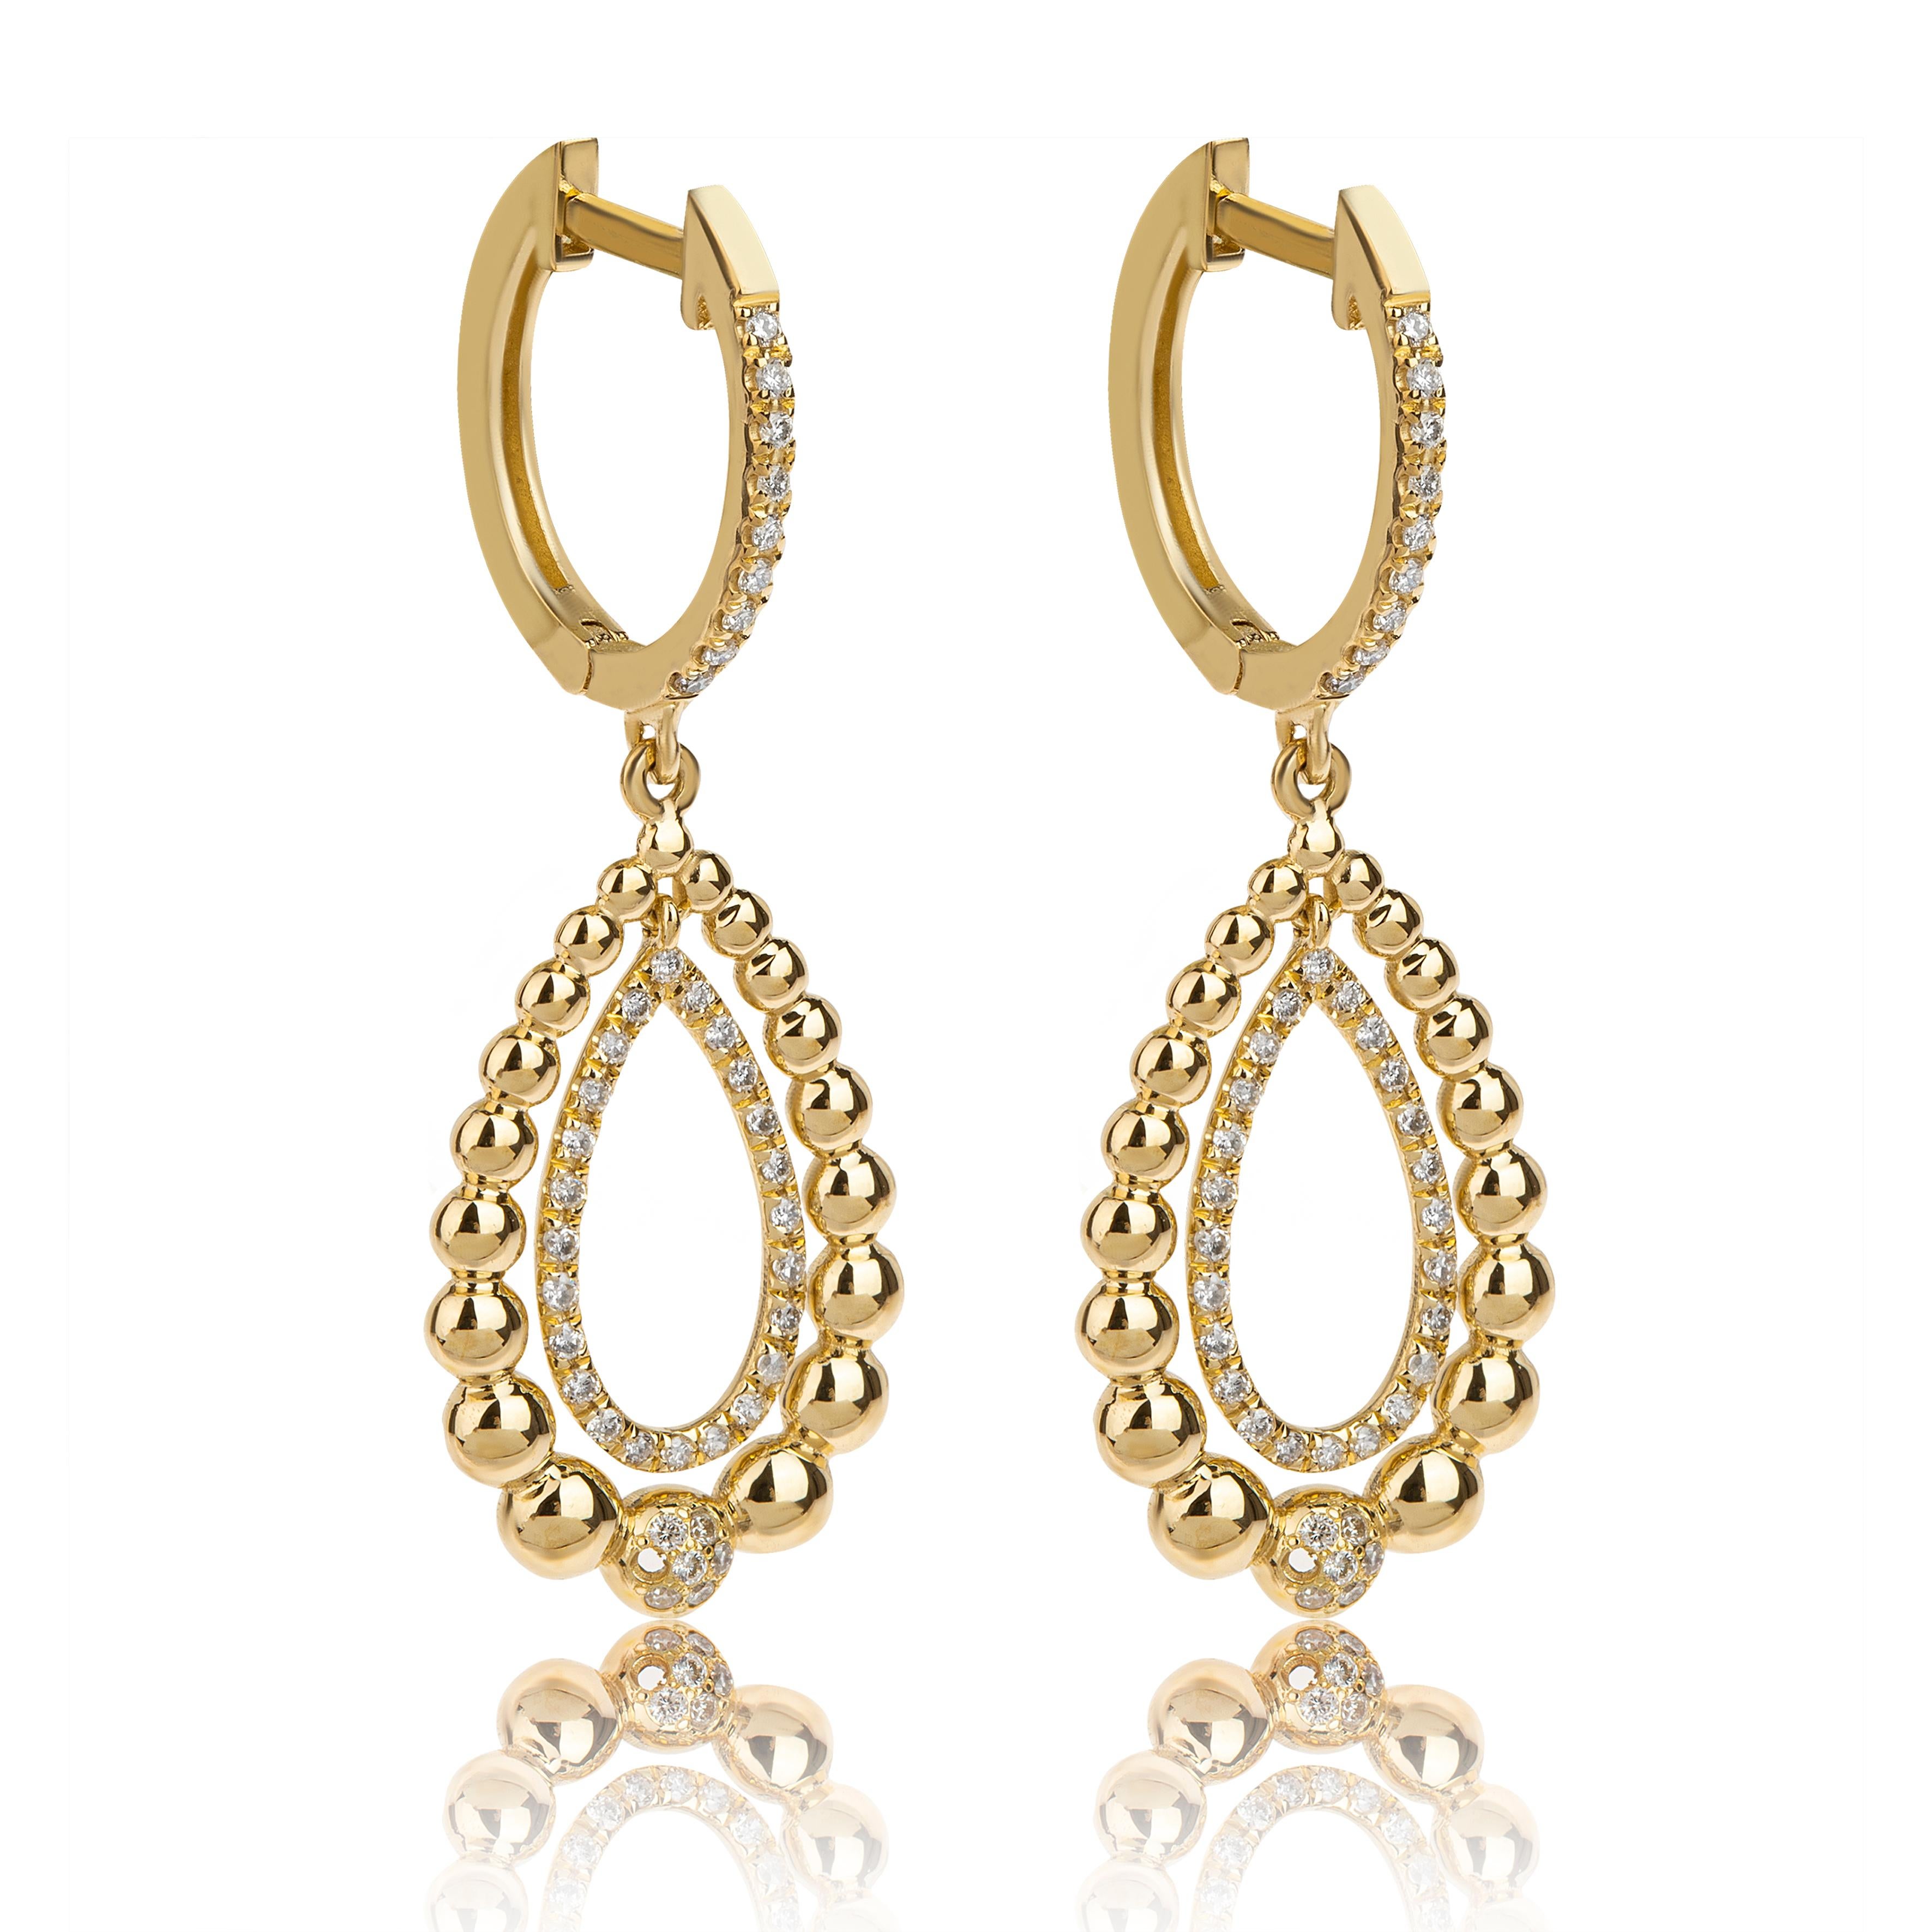 Dangle earrings in pear shape with  brilliant cut Diamonds, handcrafted in 18Kt yellow gold.  The earrings are graduated in two levels. We see also, the traditional technique of granulation. This is a special and mysterious technique that was used